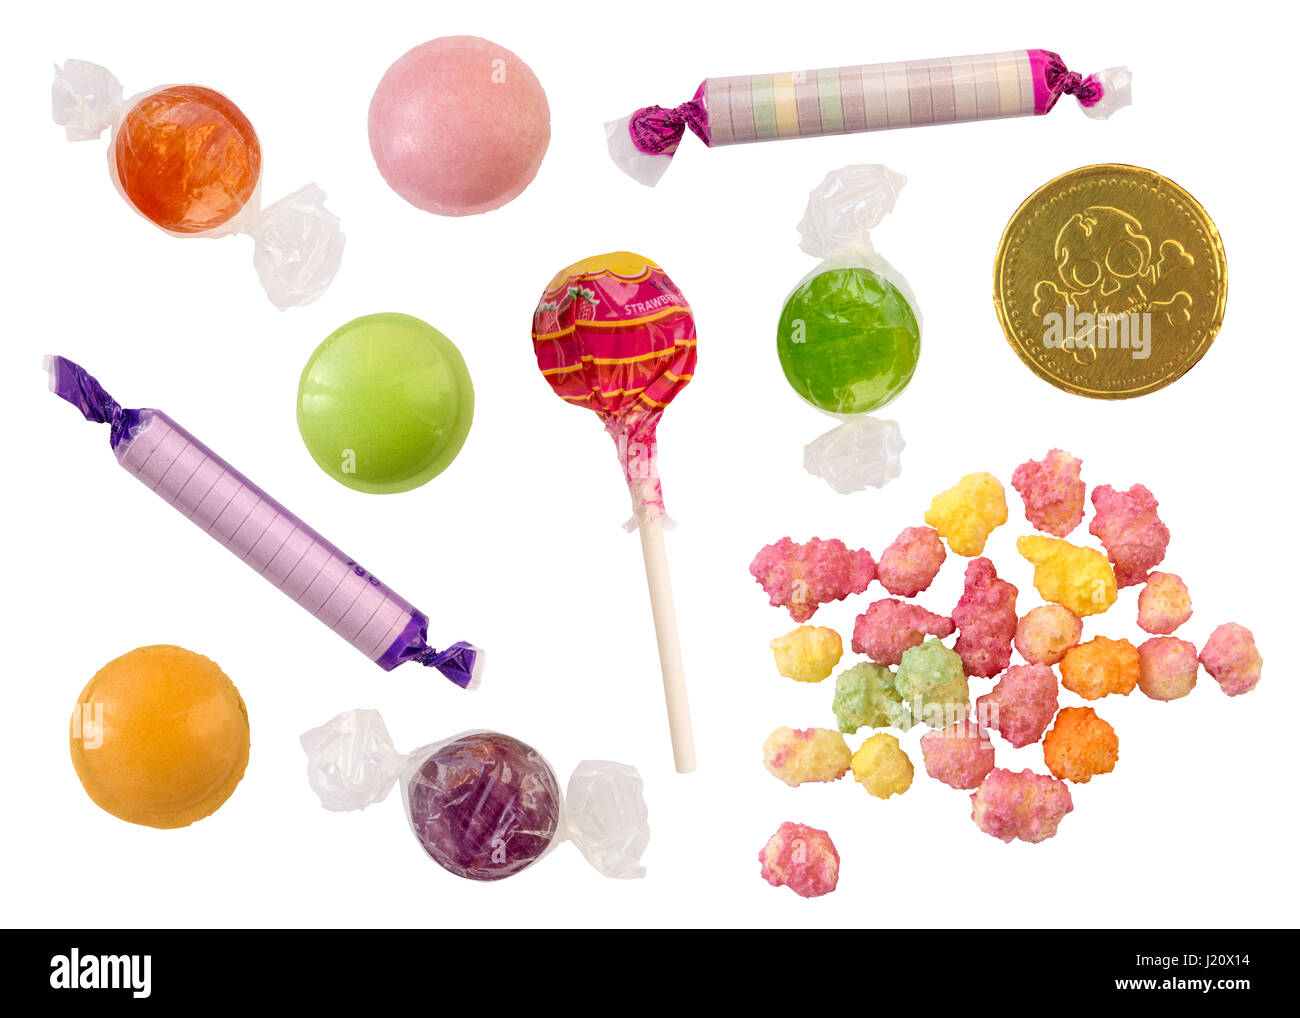 Isolated Collection Of Retro British Sweets (Candy) Stock Photo